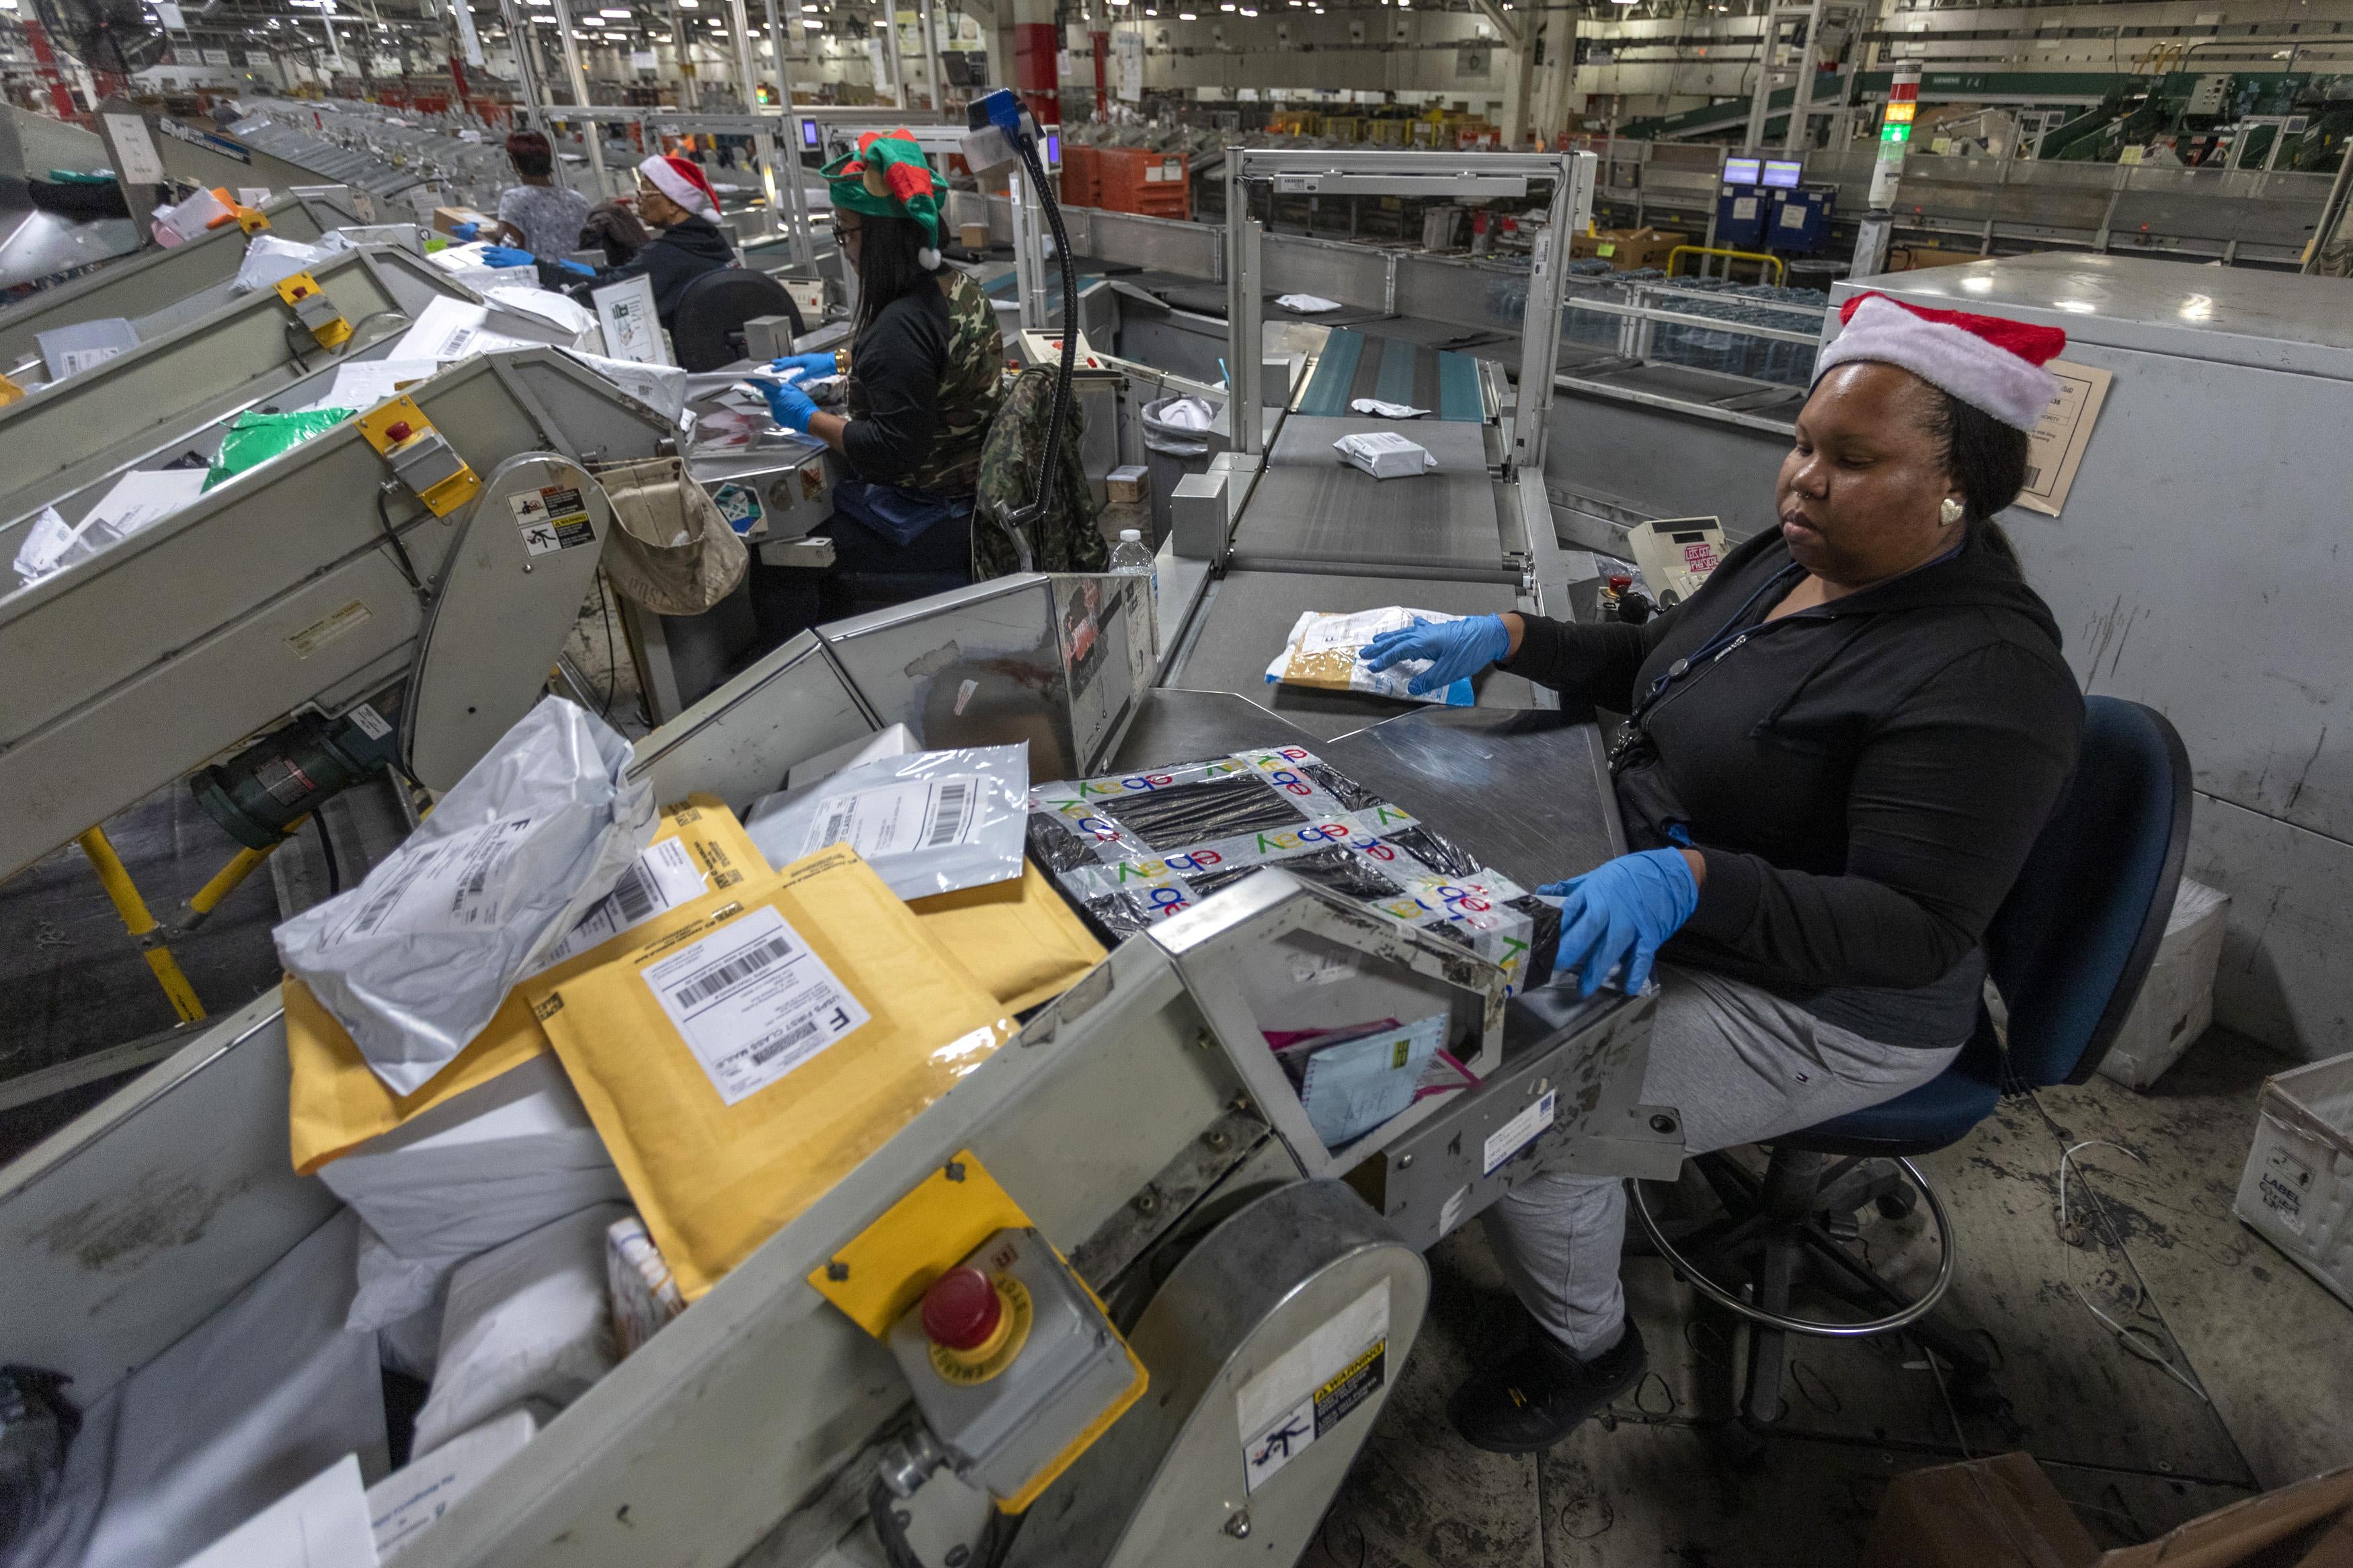 U.S. Postal Service workers scan parcels and pass them along a conveyor belt at the Los Angeles Processing and Distribution Center.